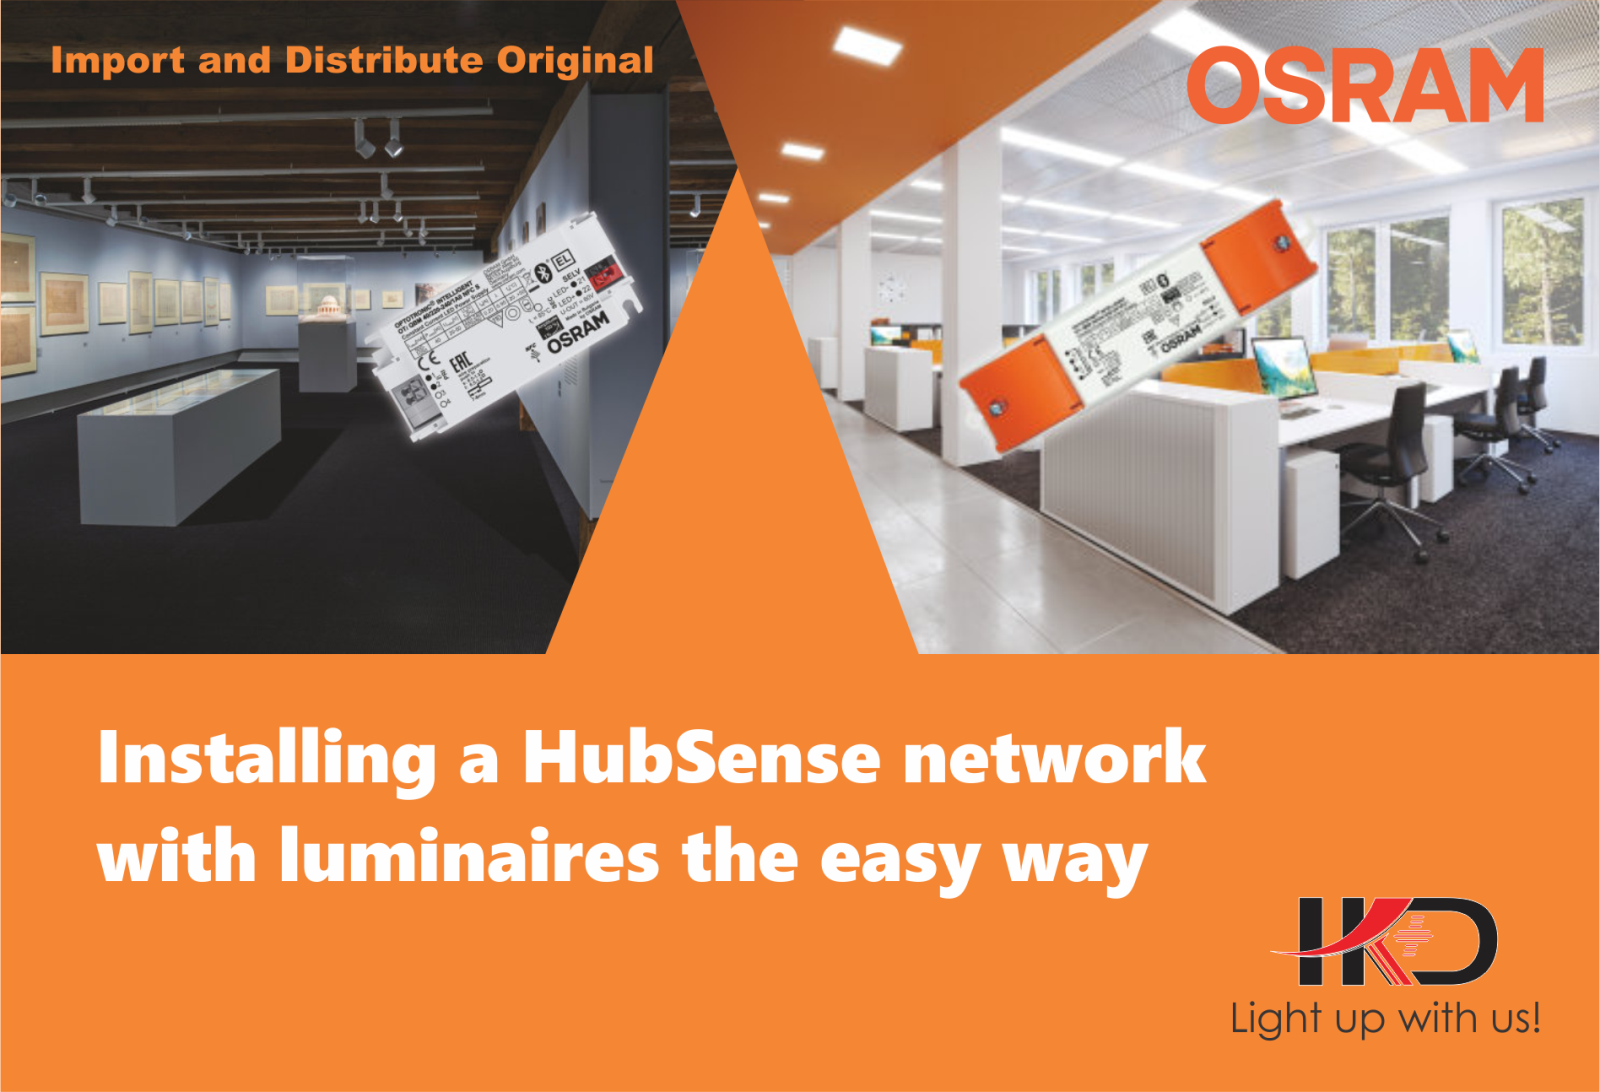 Installing a HubSense network with luminaires the easy way